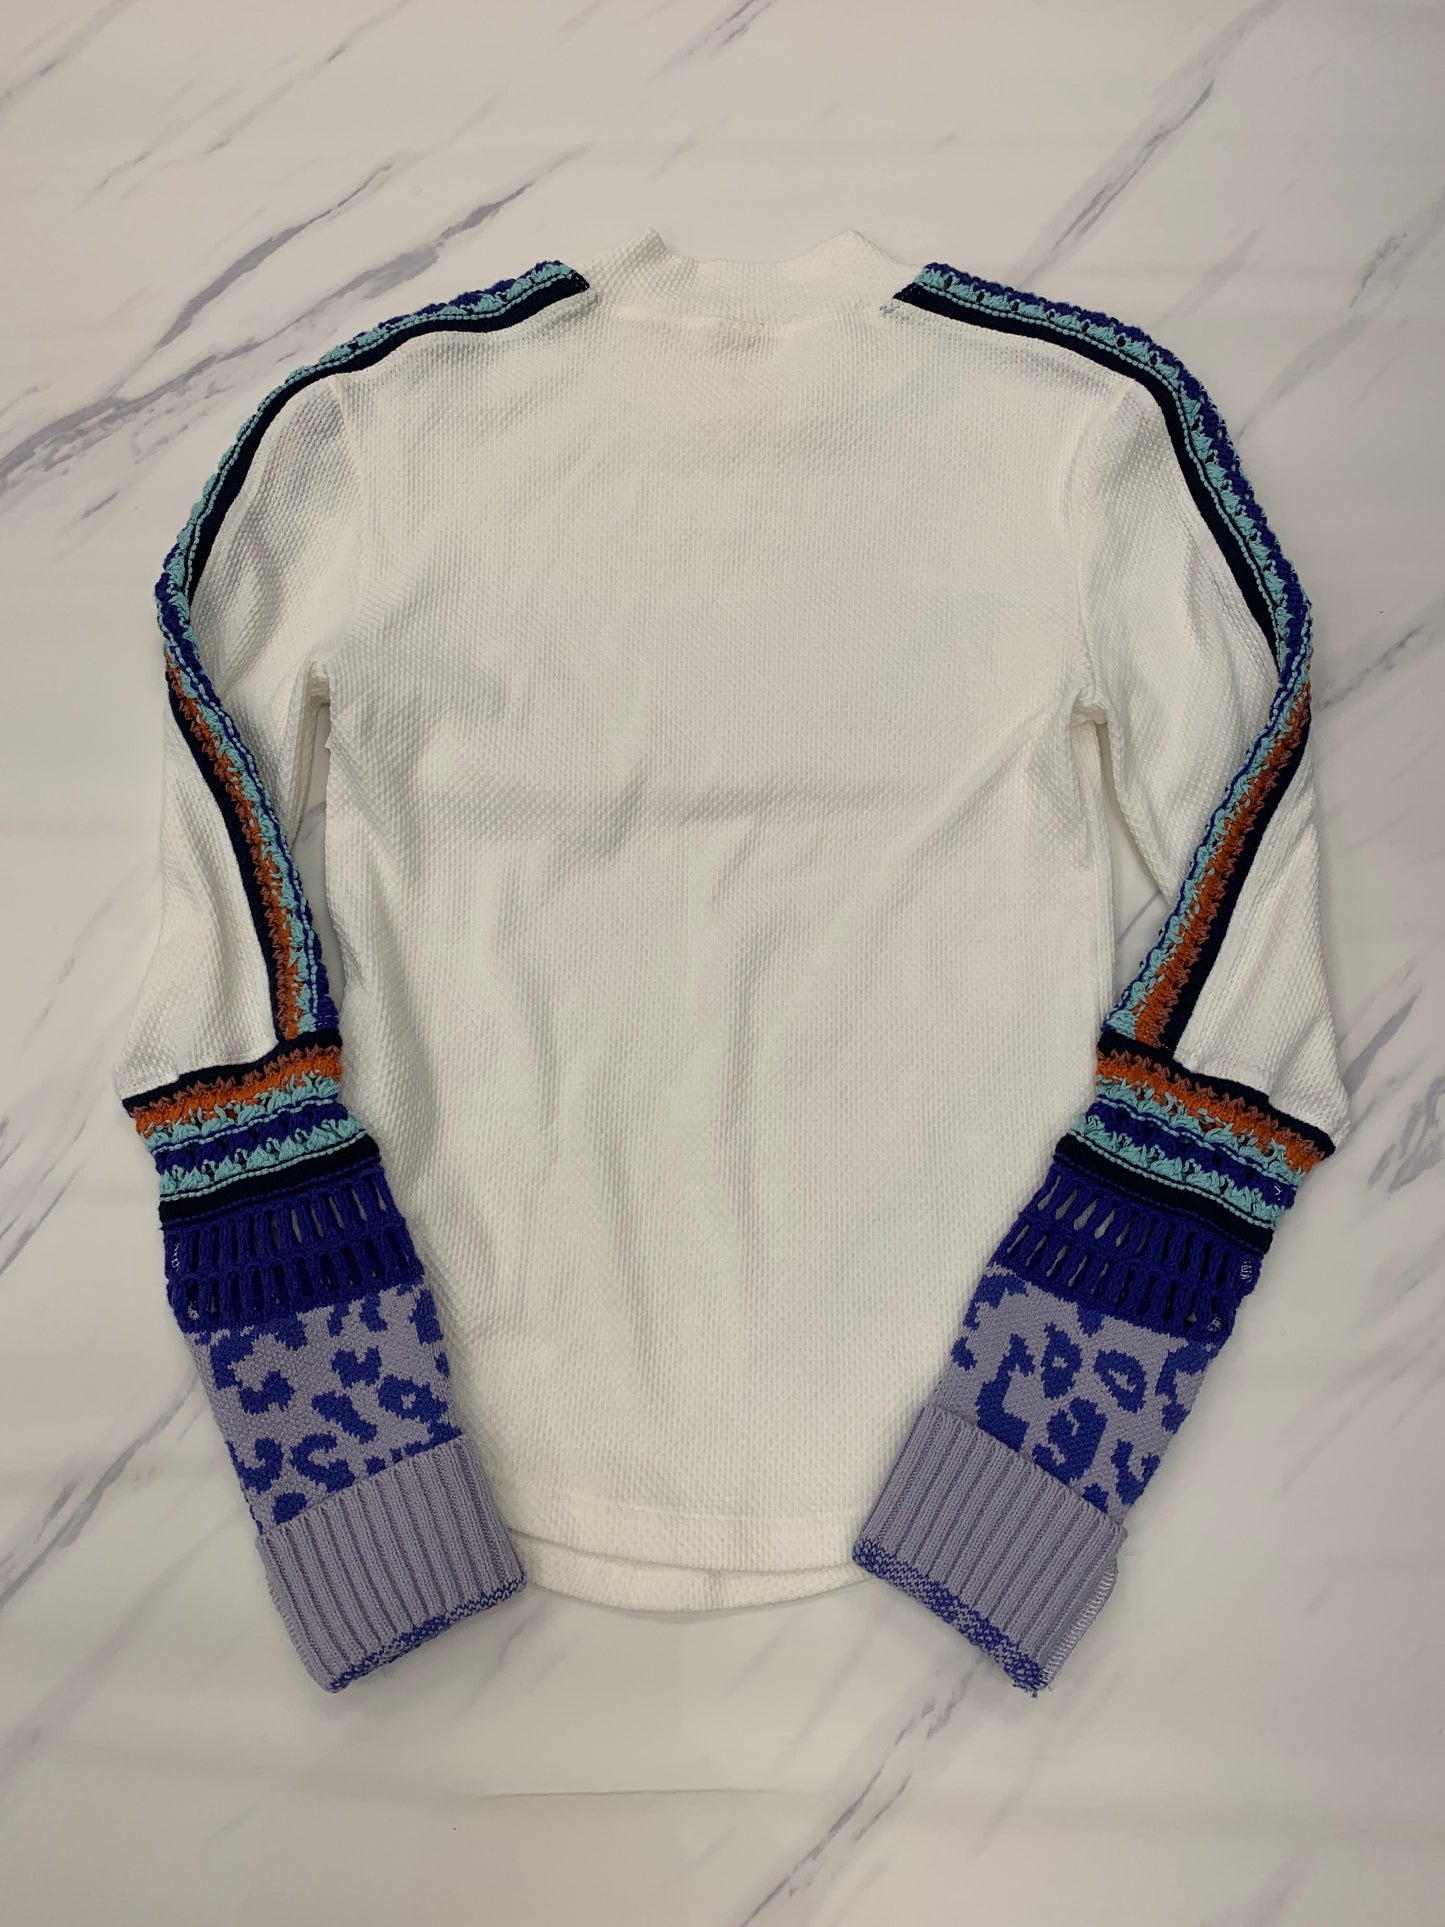 Undefinedtop Long Sleeve Free People , Size S